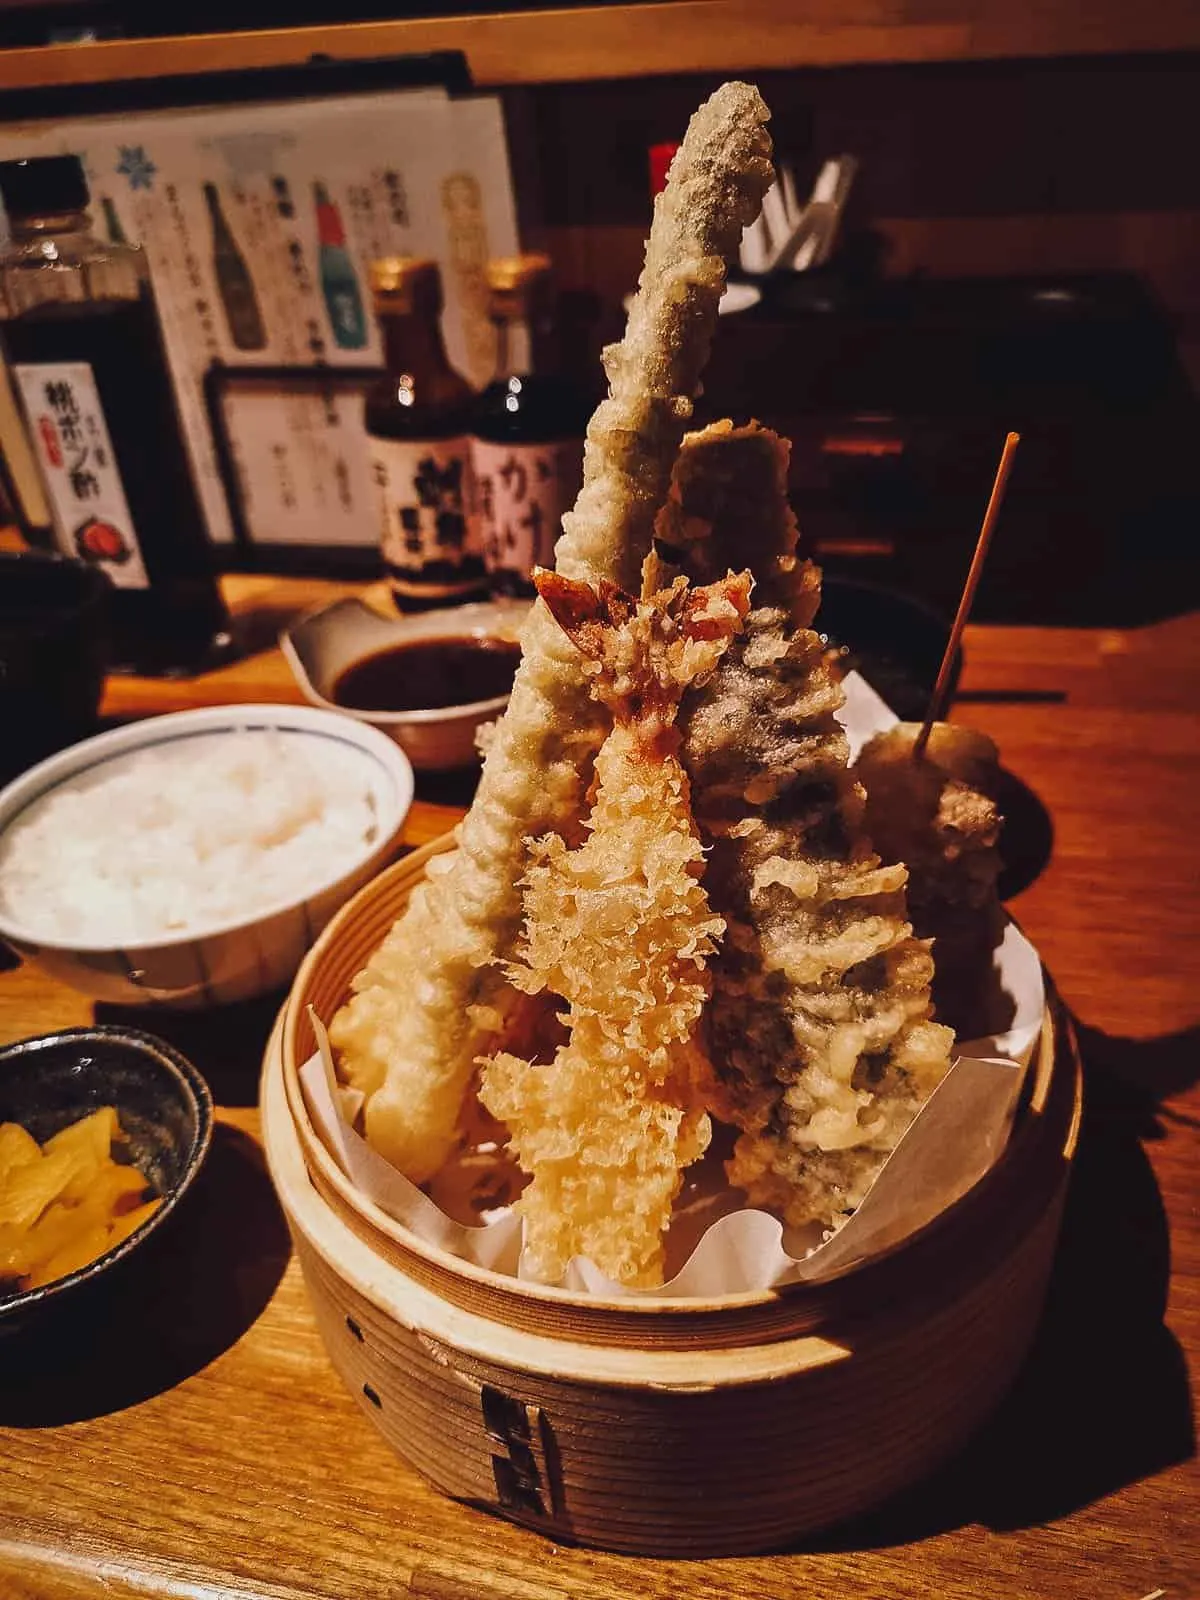 Assorted tempura with dipping sauce at a Japanese restaurant in Kyoto